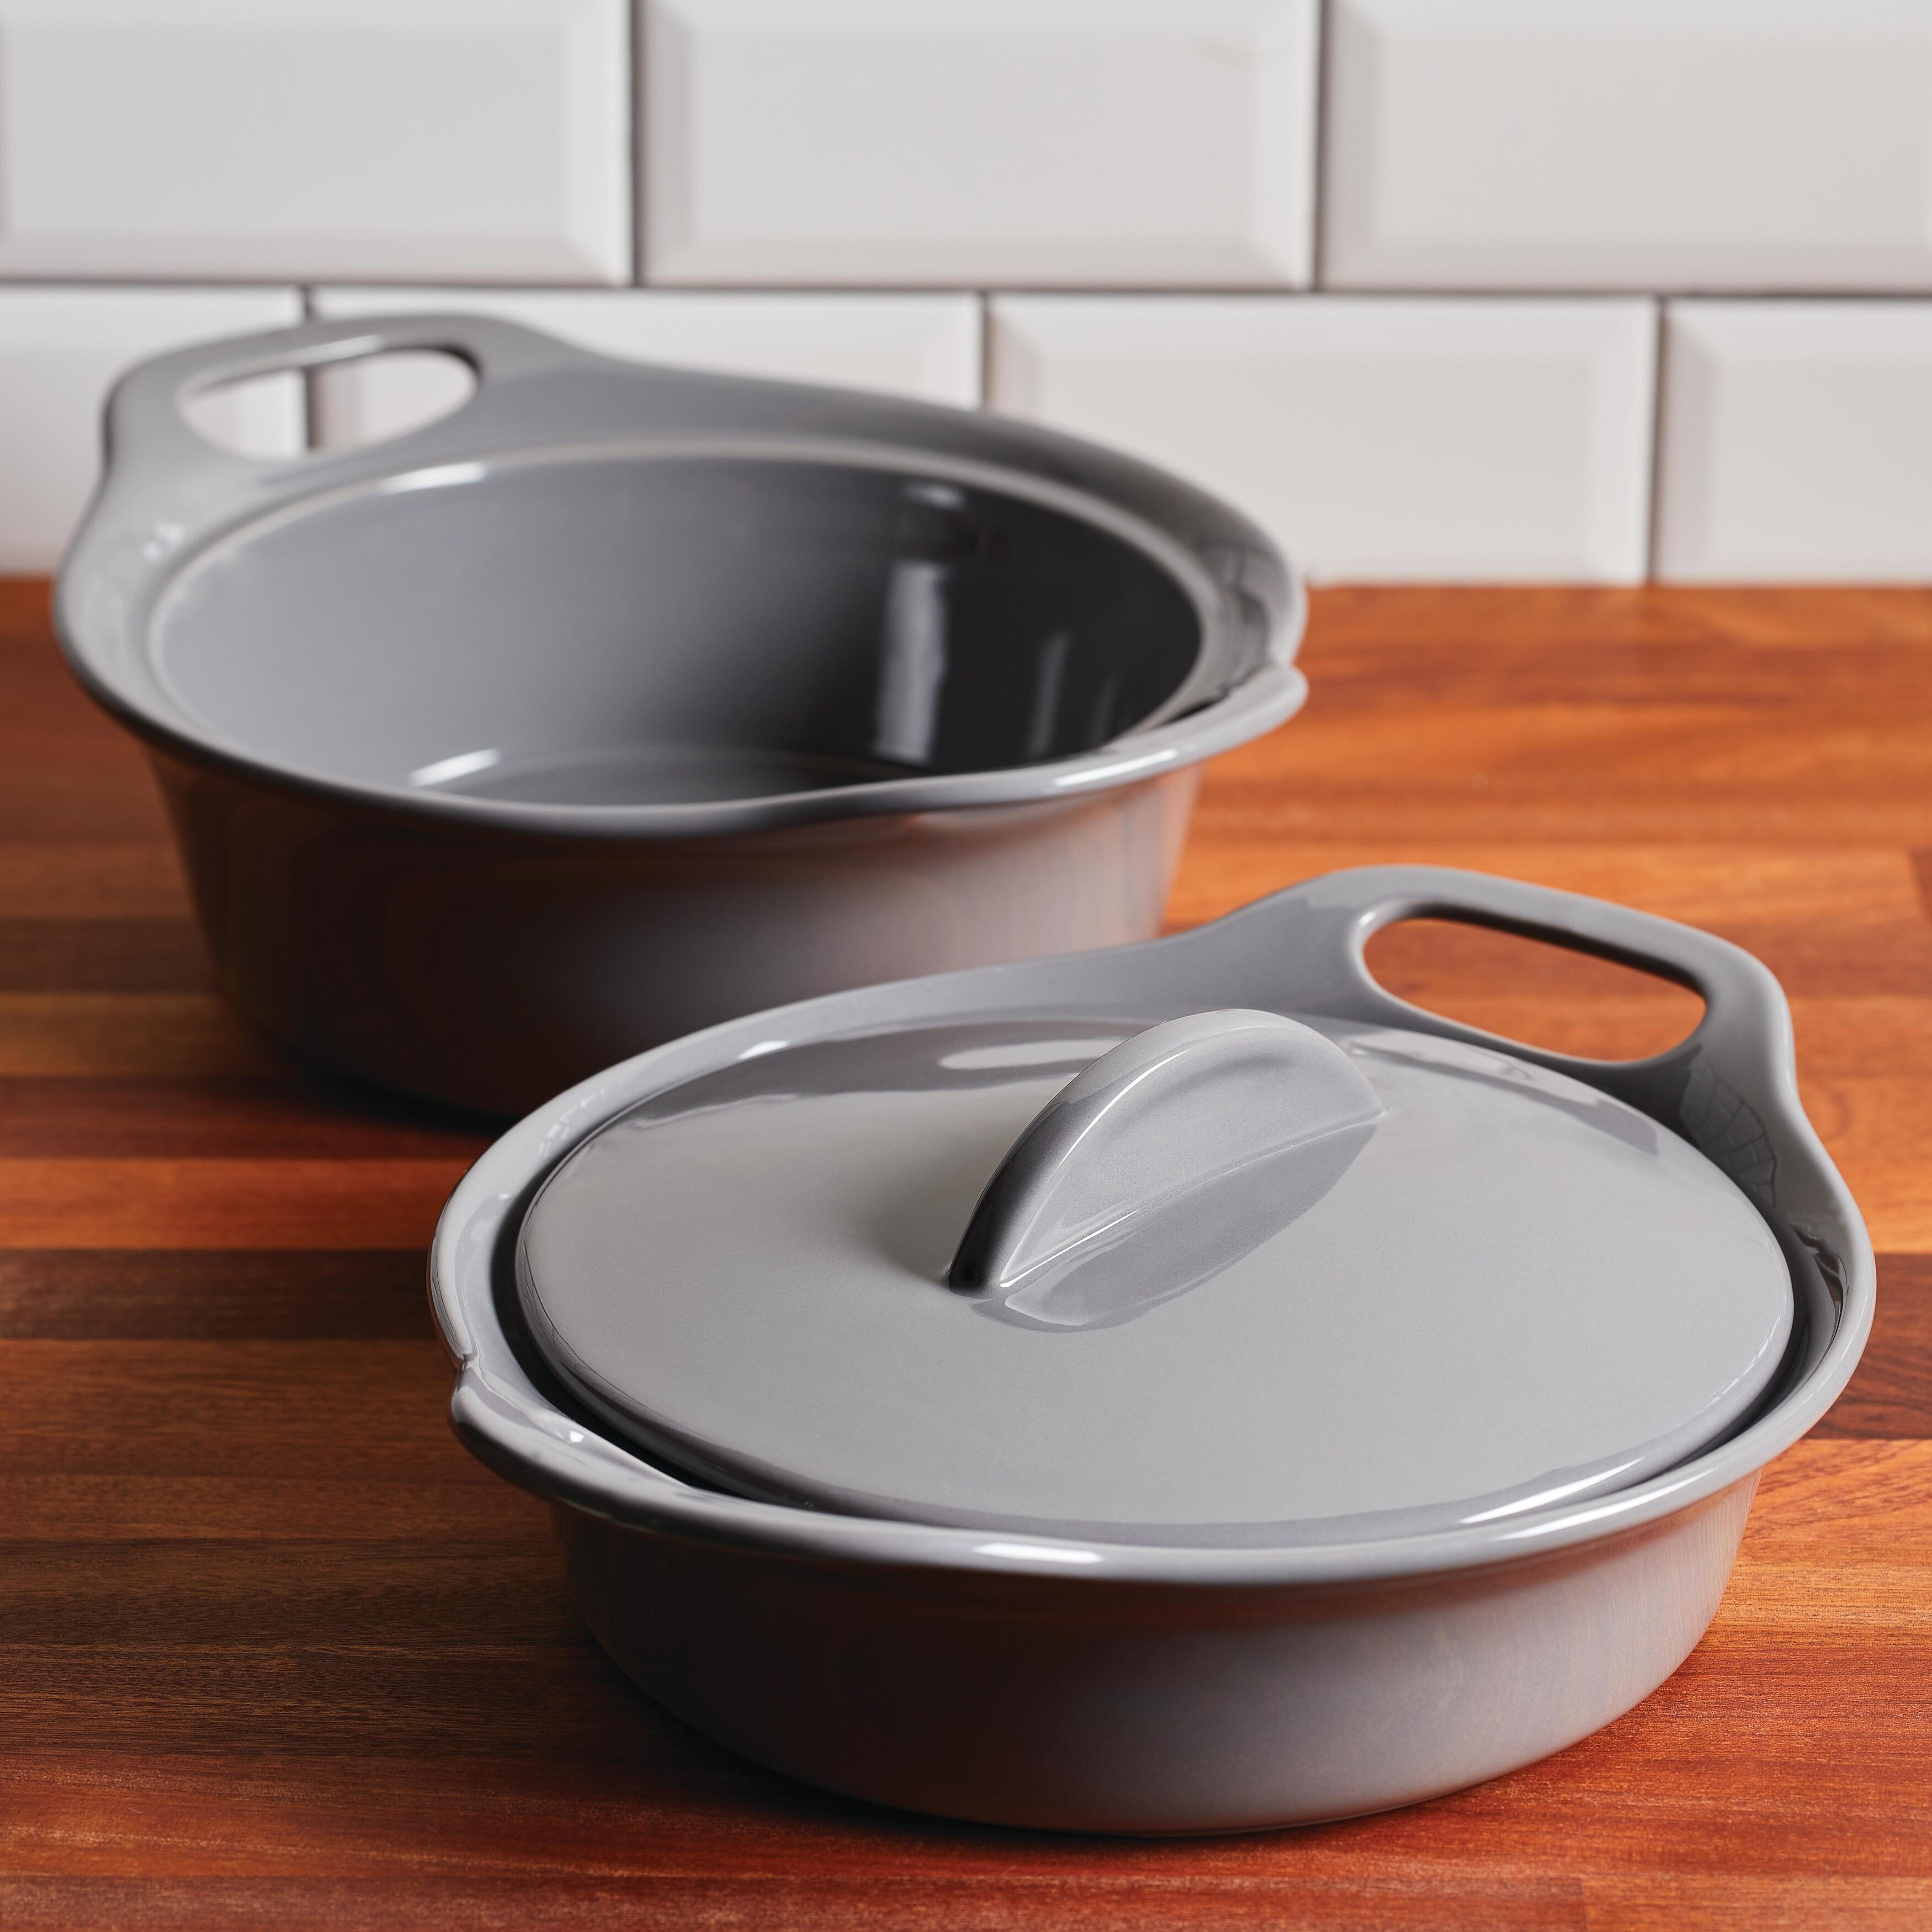 https://ak1.ostkcdn.com/images/products/is/images/direct/e4283e2f85e44d89f70b49b7f069d5df8d794b57/Rachael-Ray-Ceramic-Casserole-Bakers-with-Shared-Lid-Set%2C-3-Piece%2C-Dark-Gray.jpg